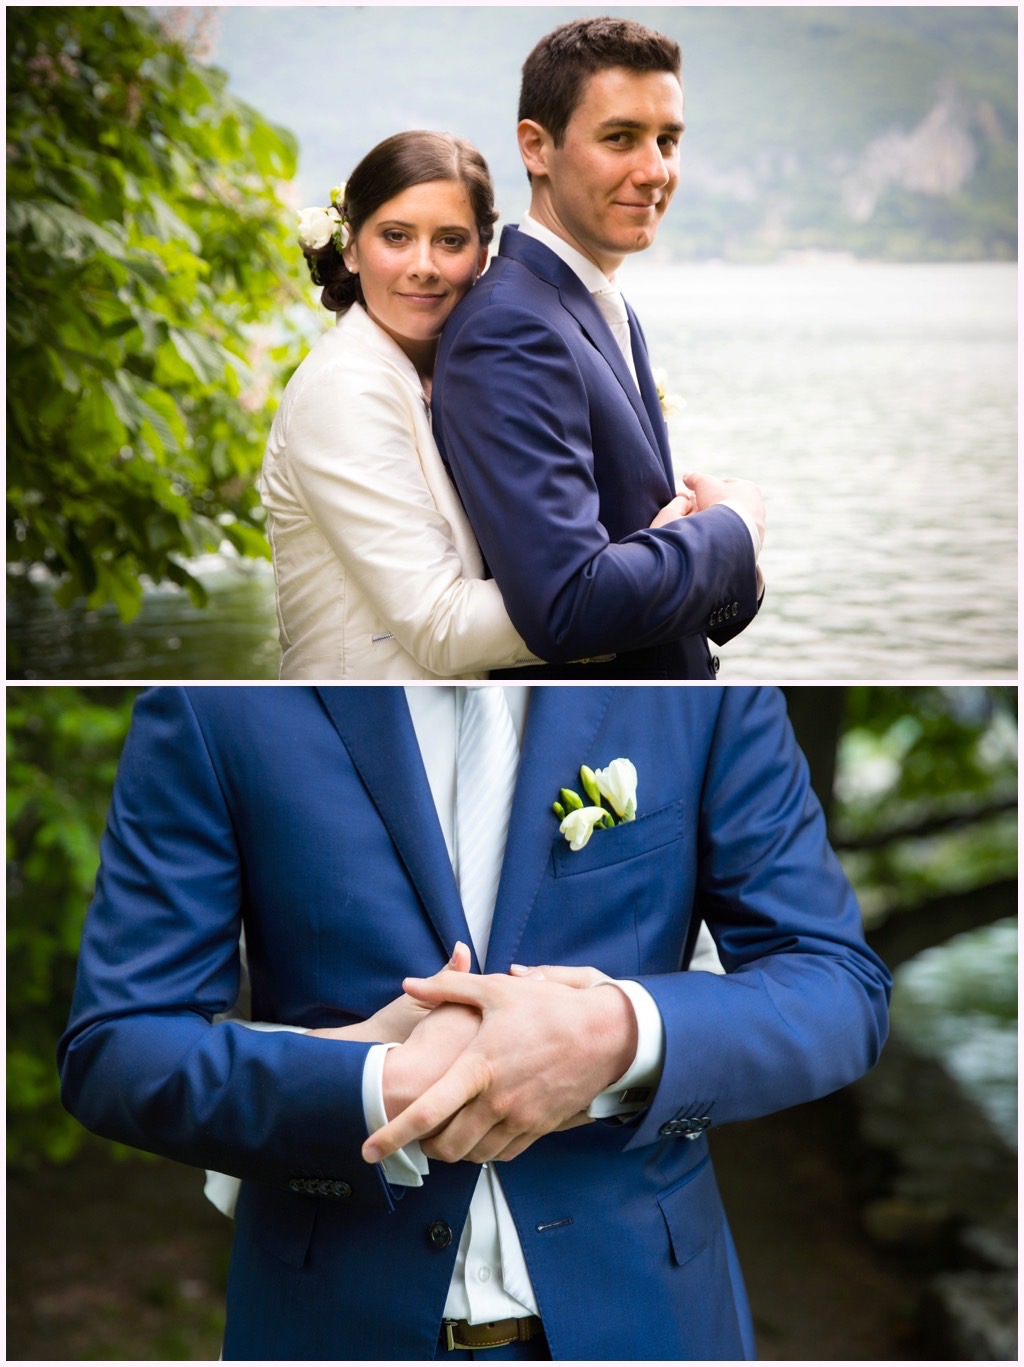 photo couple mariage lac annecy